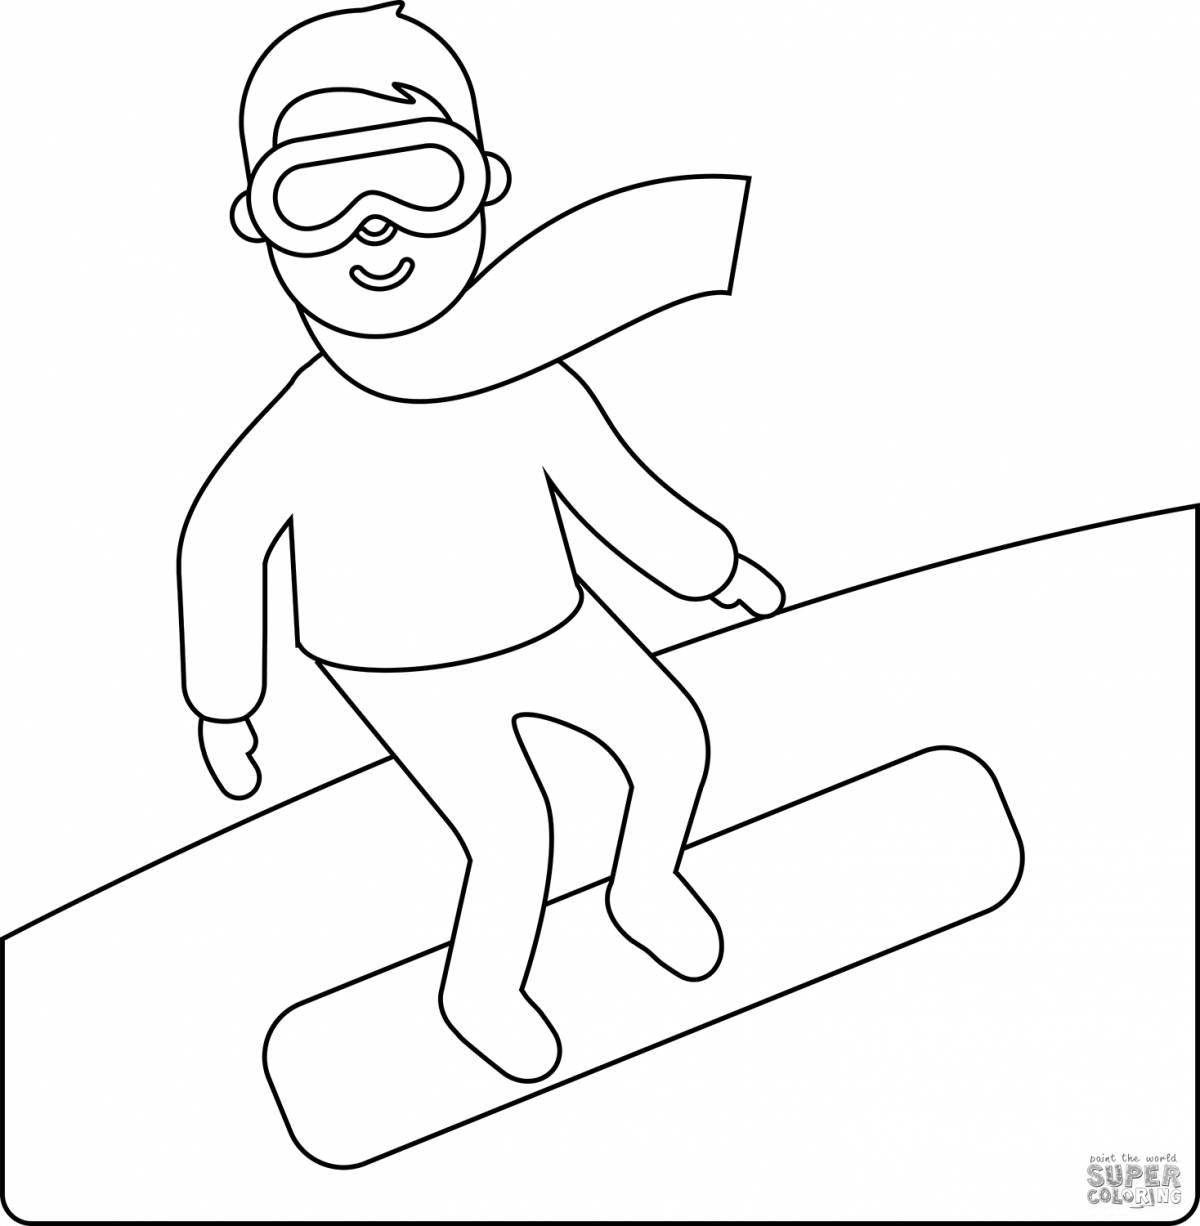 Snowboarder fun coloring book for kids